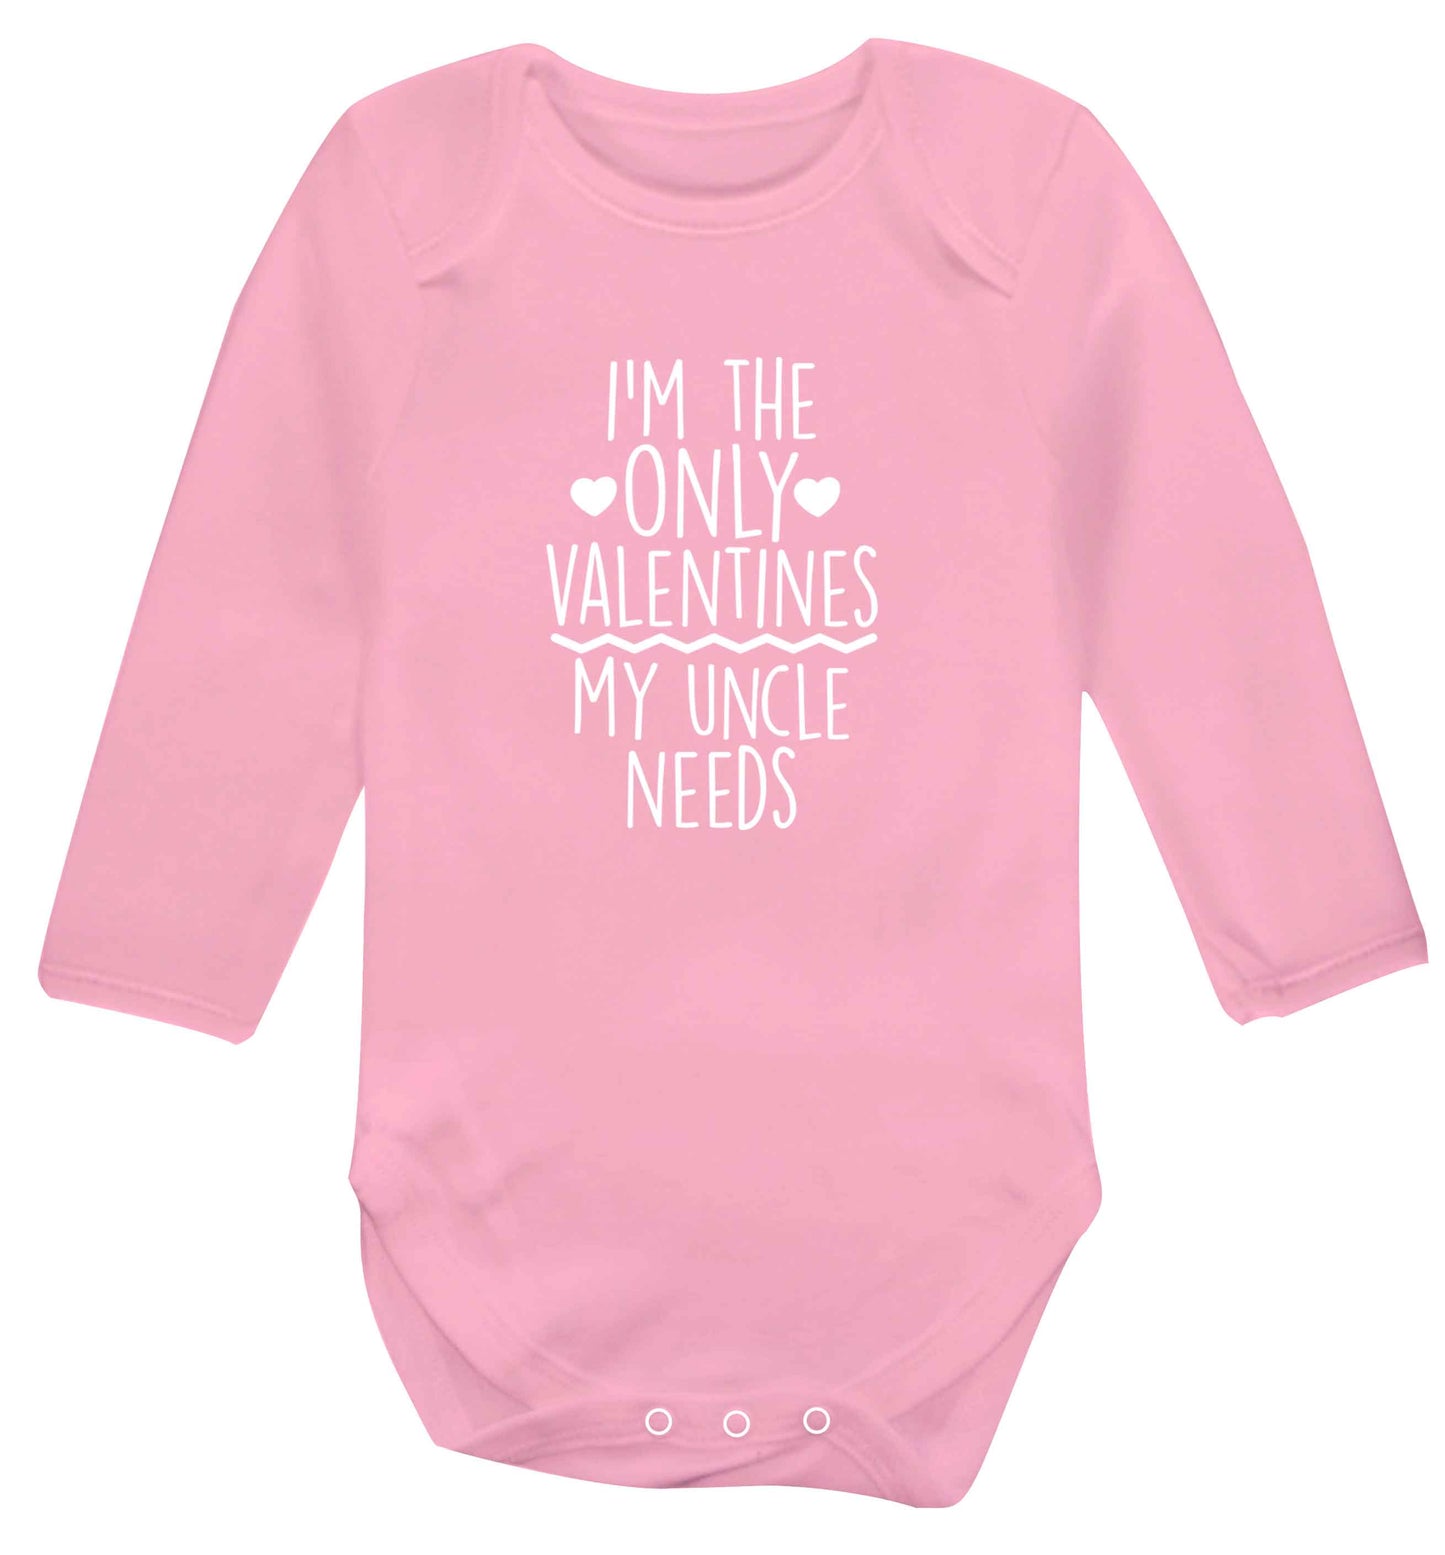 I'm the only valentines my uncle needs baby vest long sleeved pale pink 6-12 months